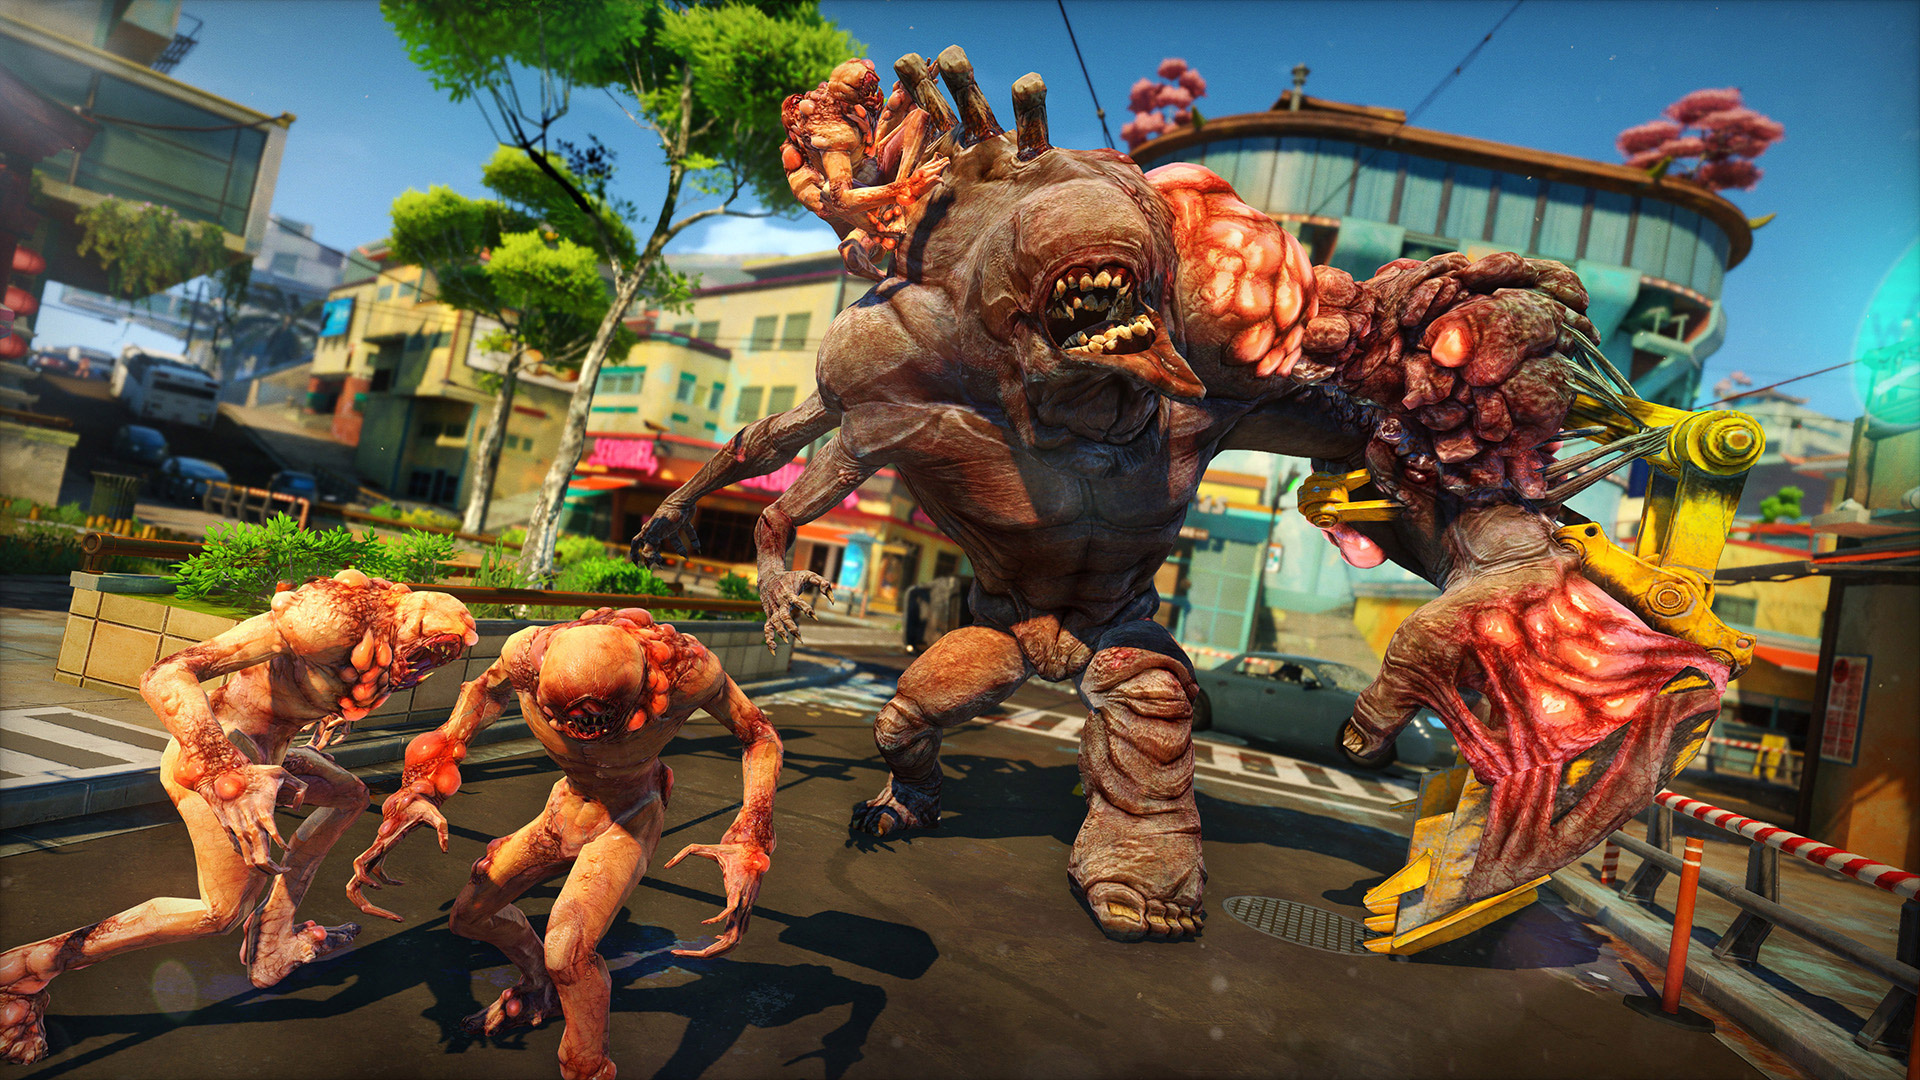 The ESRB Just Rated Sunset Overdrive For PC